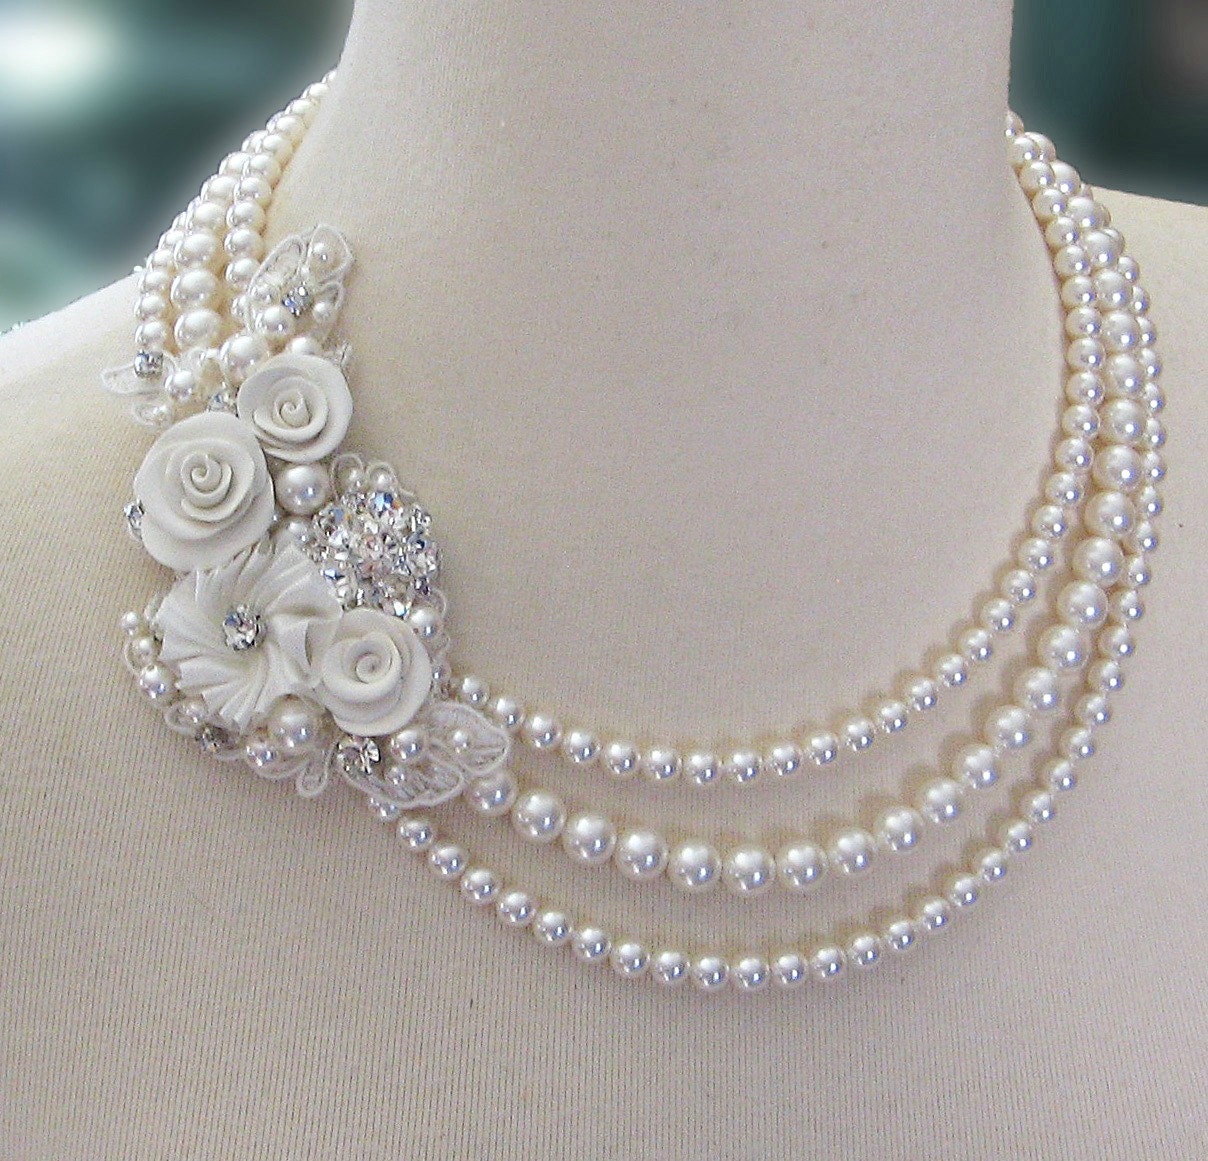 Swarovski Pearl Statement Necklace With Crystals By Theredmagnolia